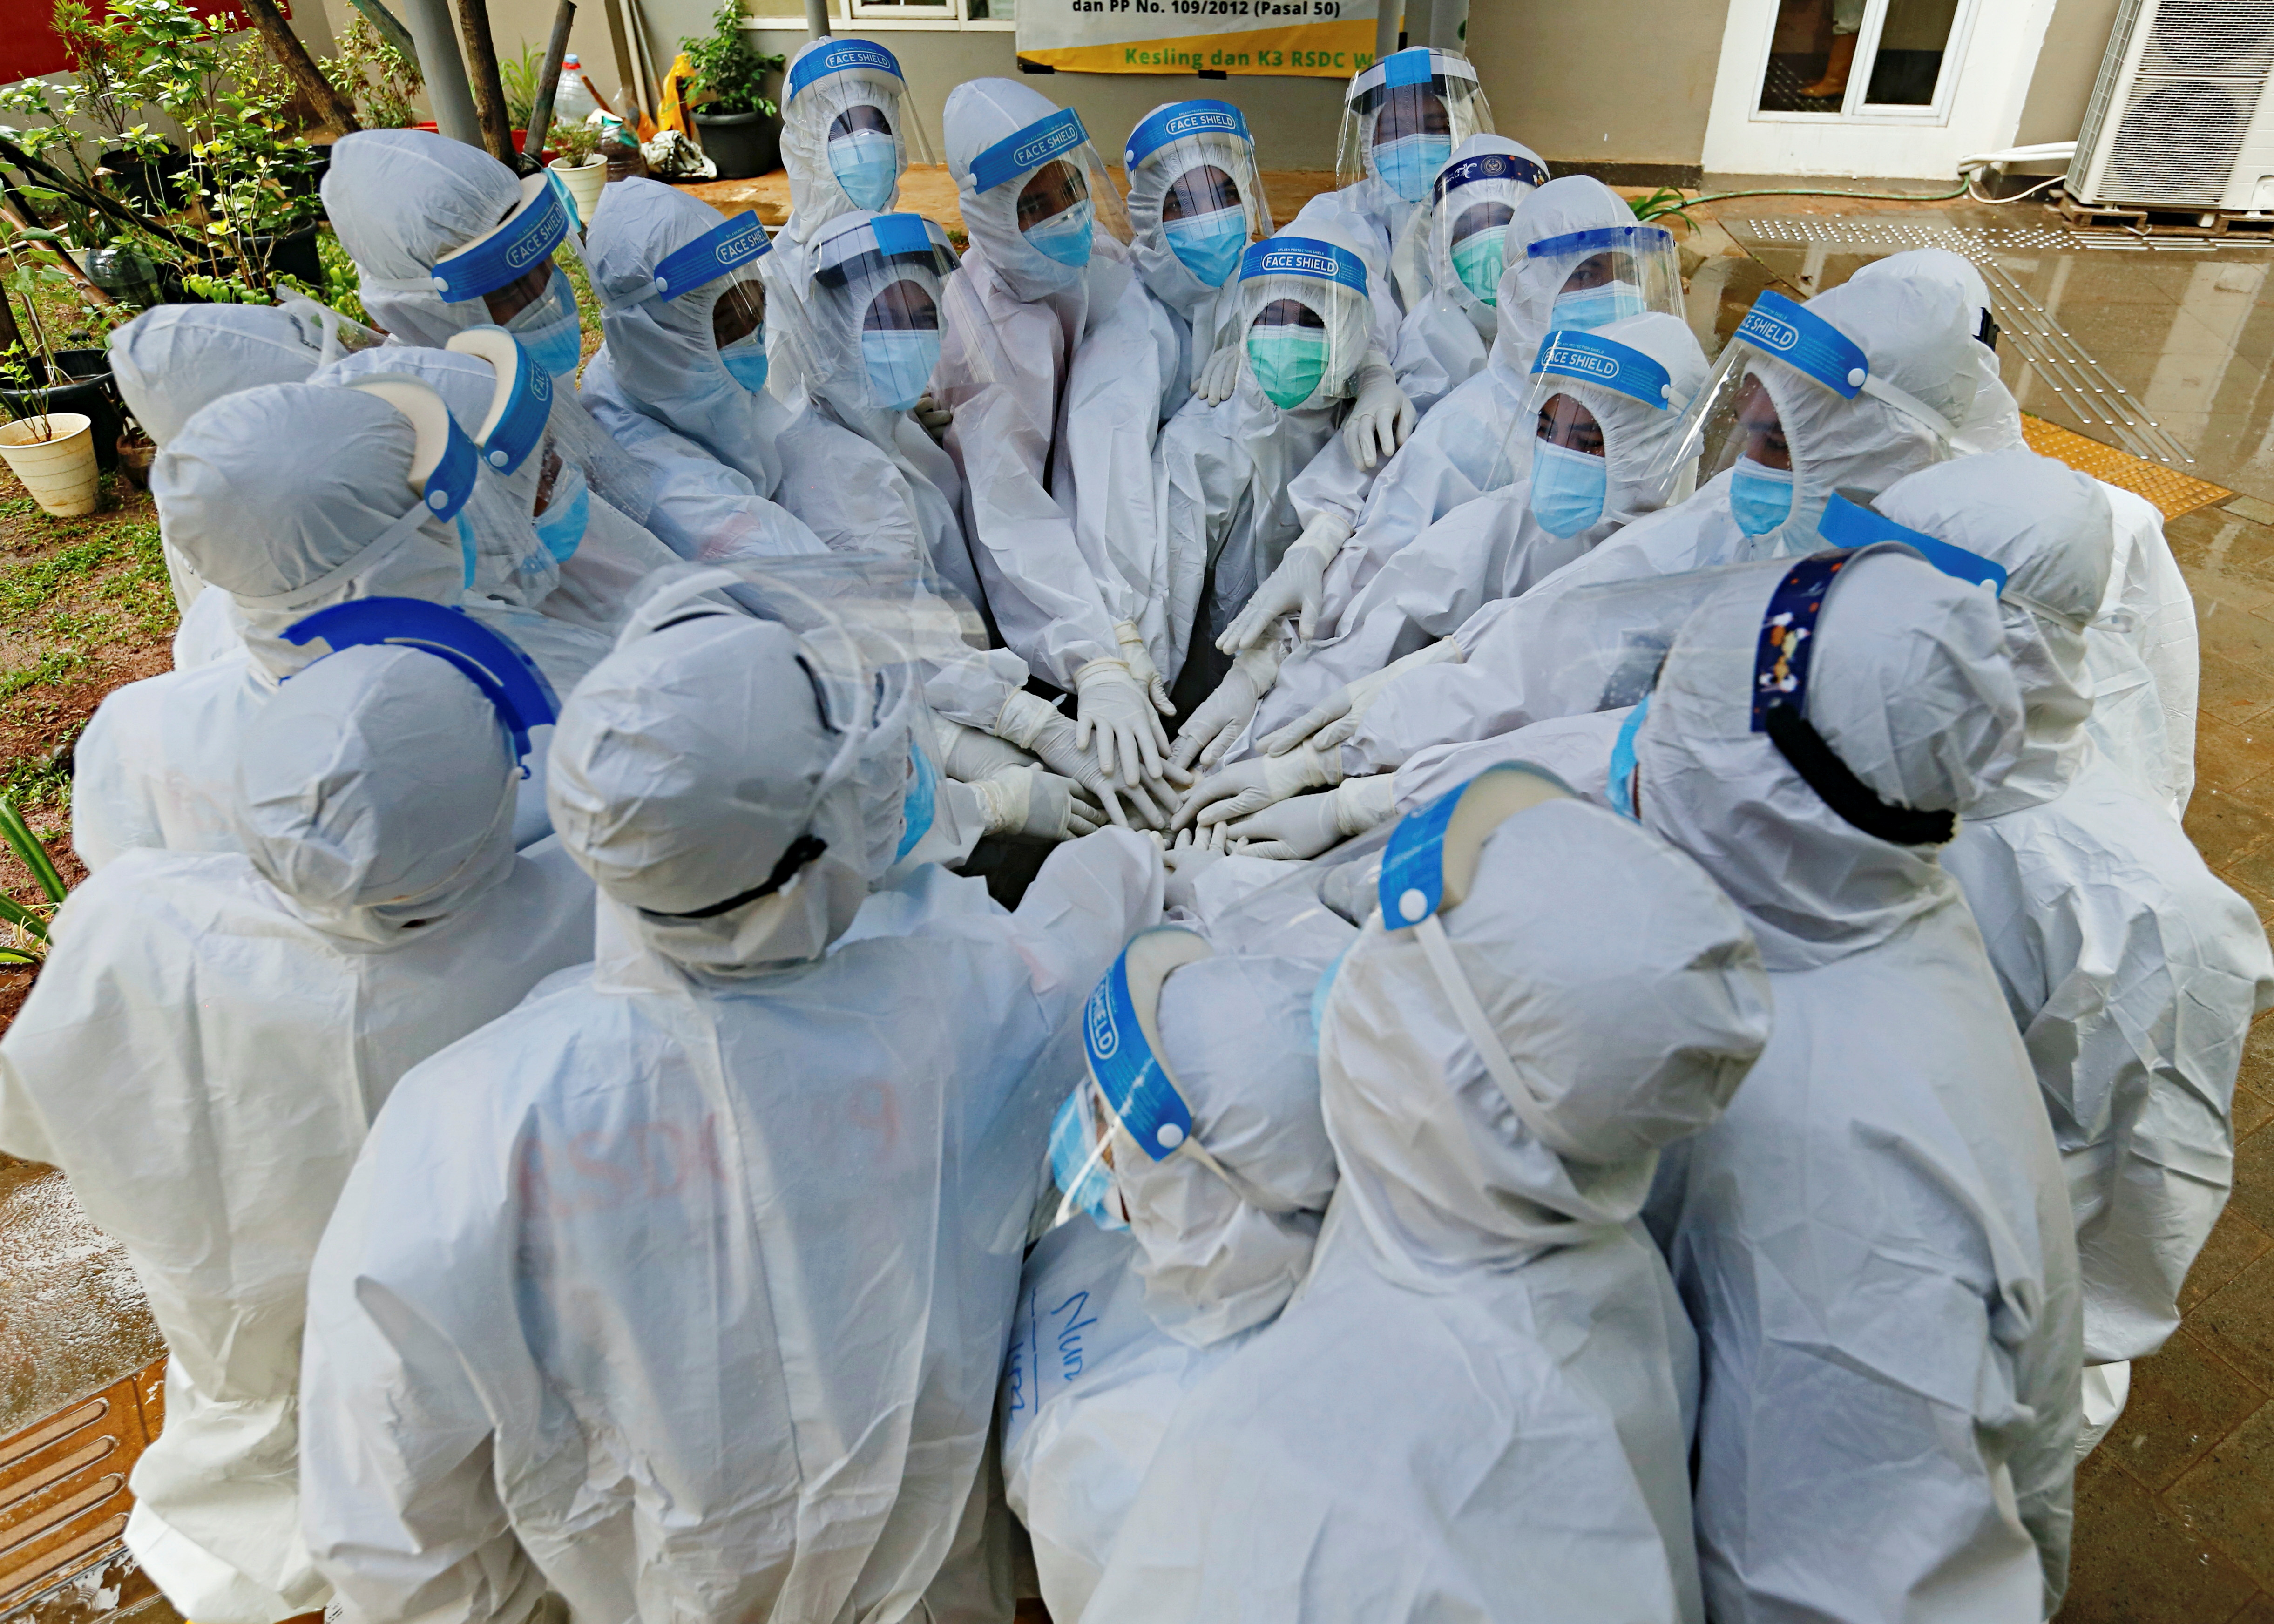 Healthcare workers wearing personal protective equipment (PPE) prepare to treat patients at the emergency hospital for coronavirus disease (COVID-19) in Athletes Village, Jakarta, Indonesia January 26, 2021. REUTERS/Ajeng Dinar Ulfiana